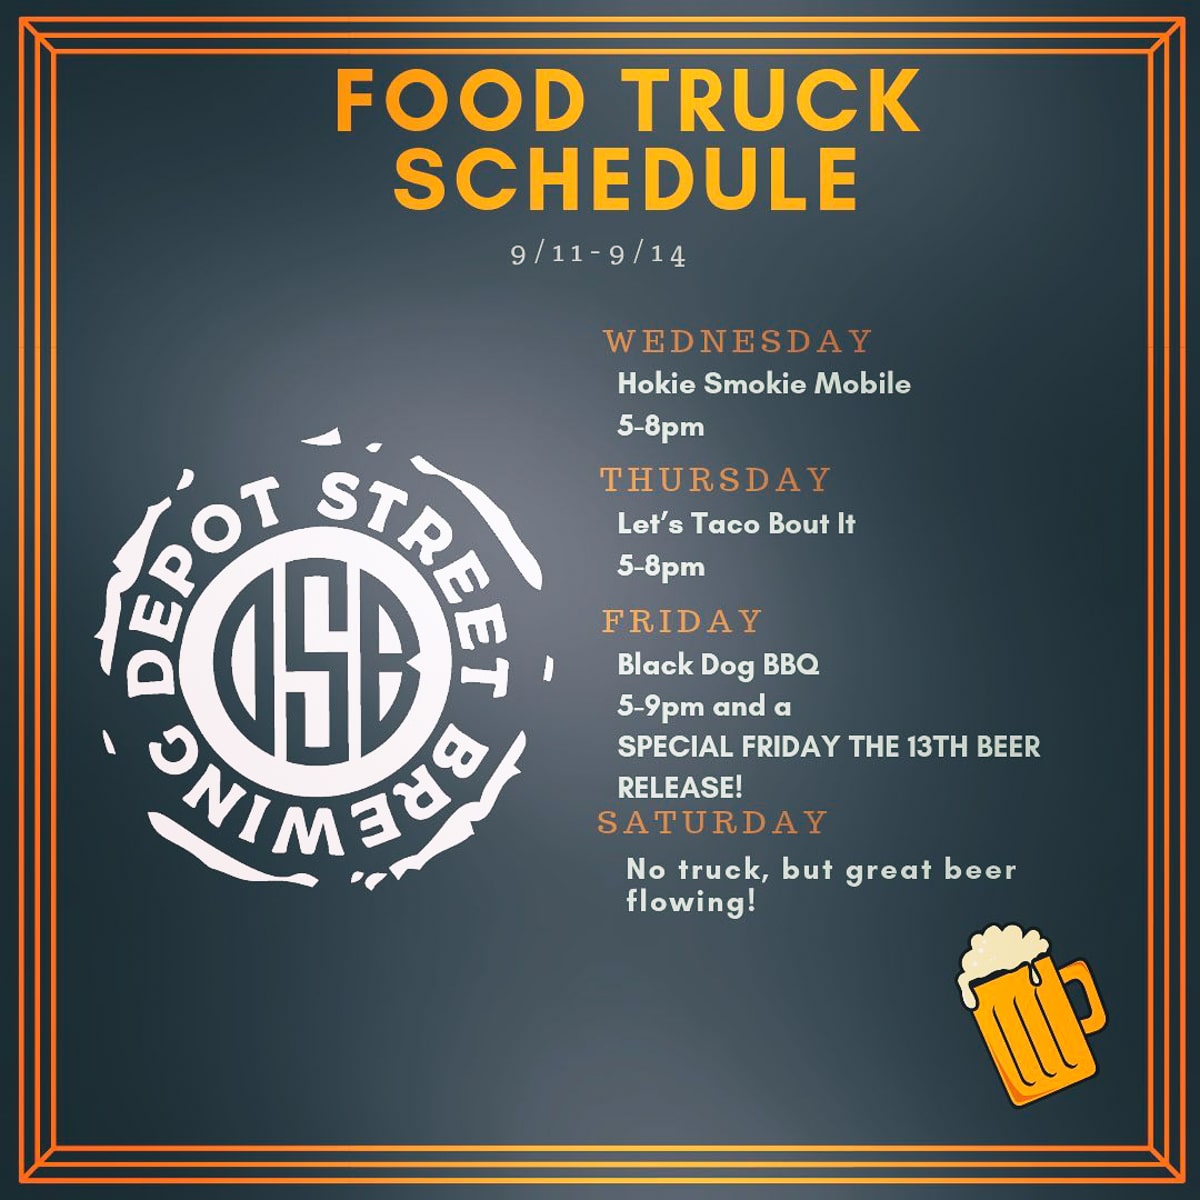 Depot Street Brewing food truck schedule for different days of the week posted on facebook and instagram